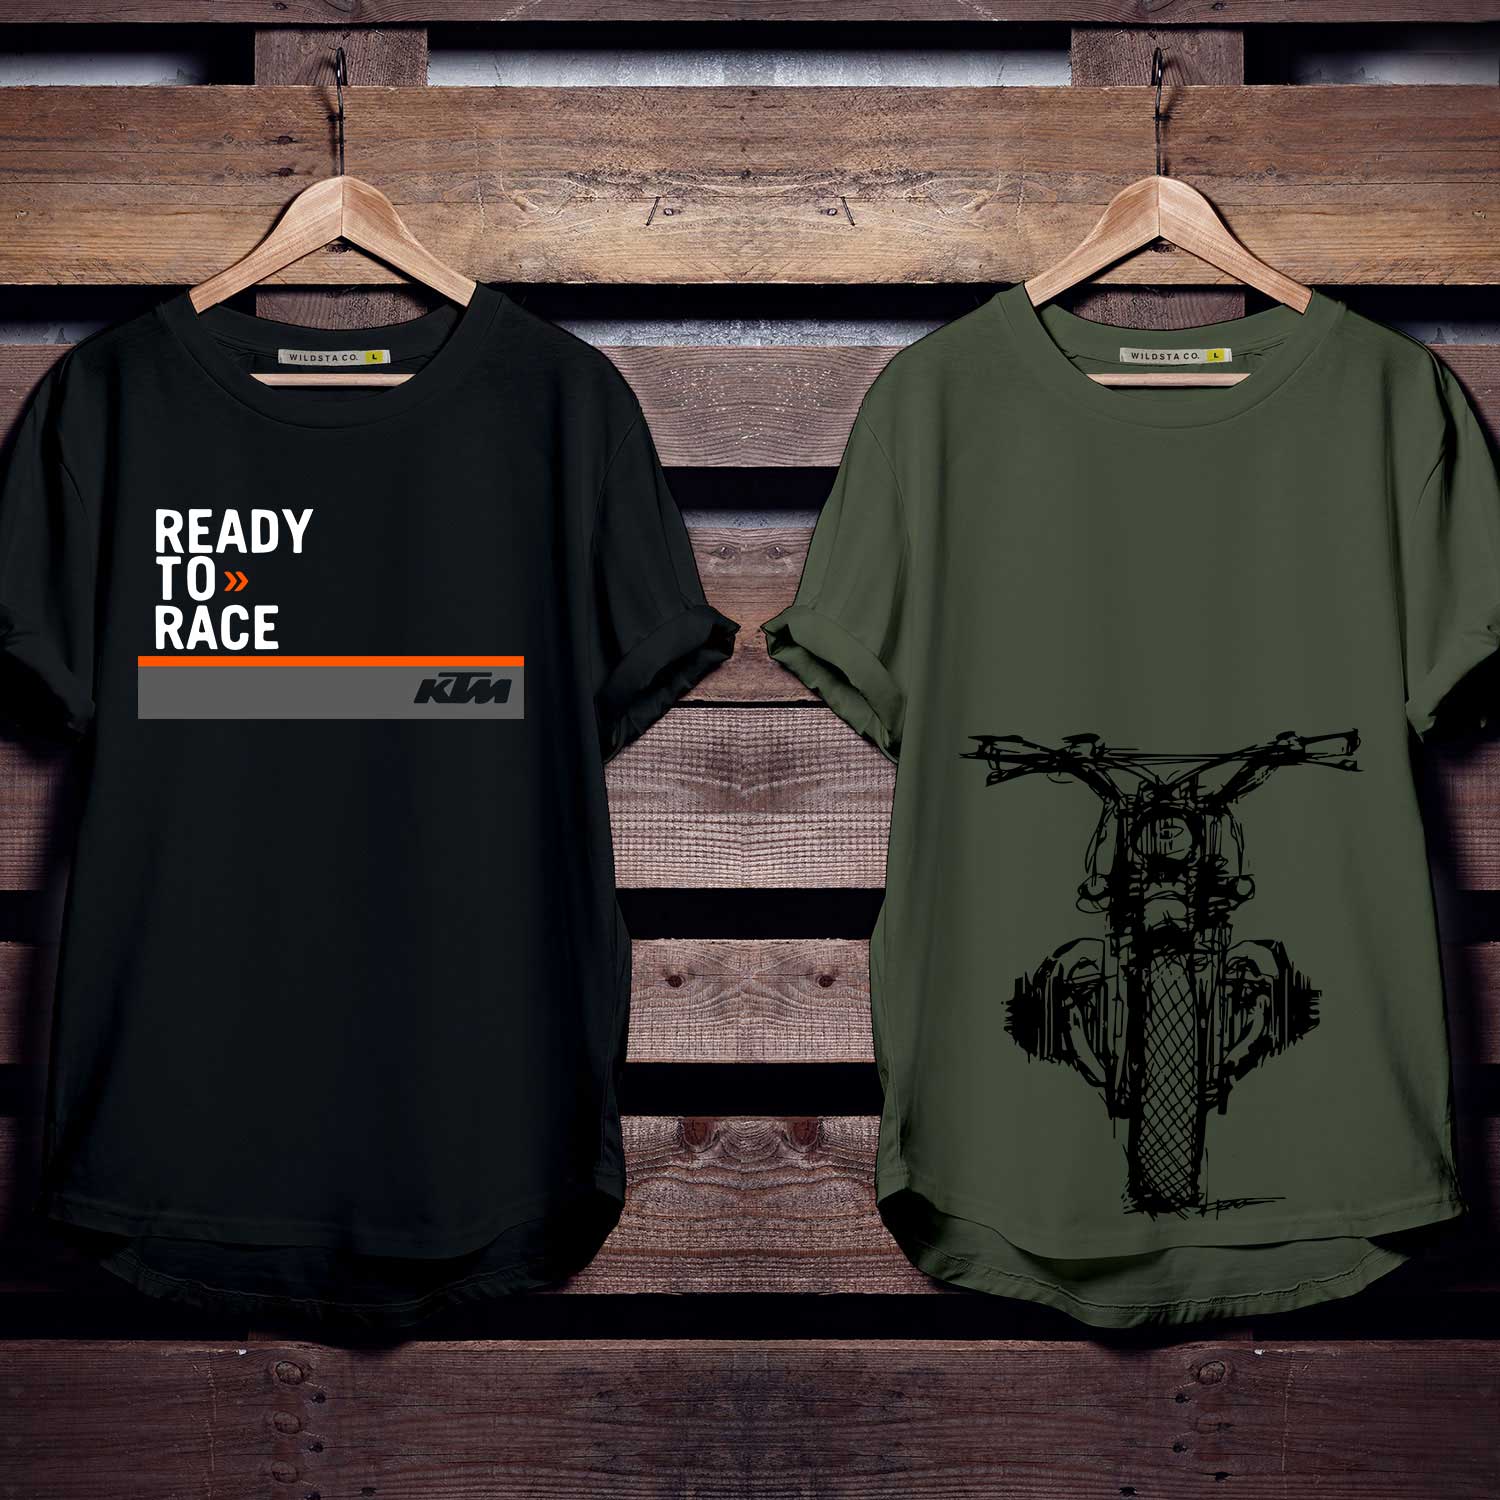 Shop for Ready to Race & Retro Motorcycle Combo Tshirts in India With Free Shipping at 799.00 by Denvara.com